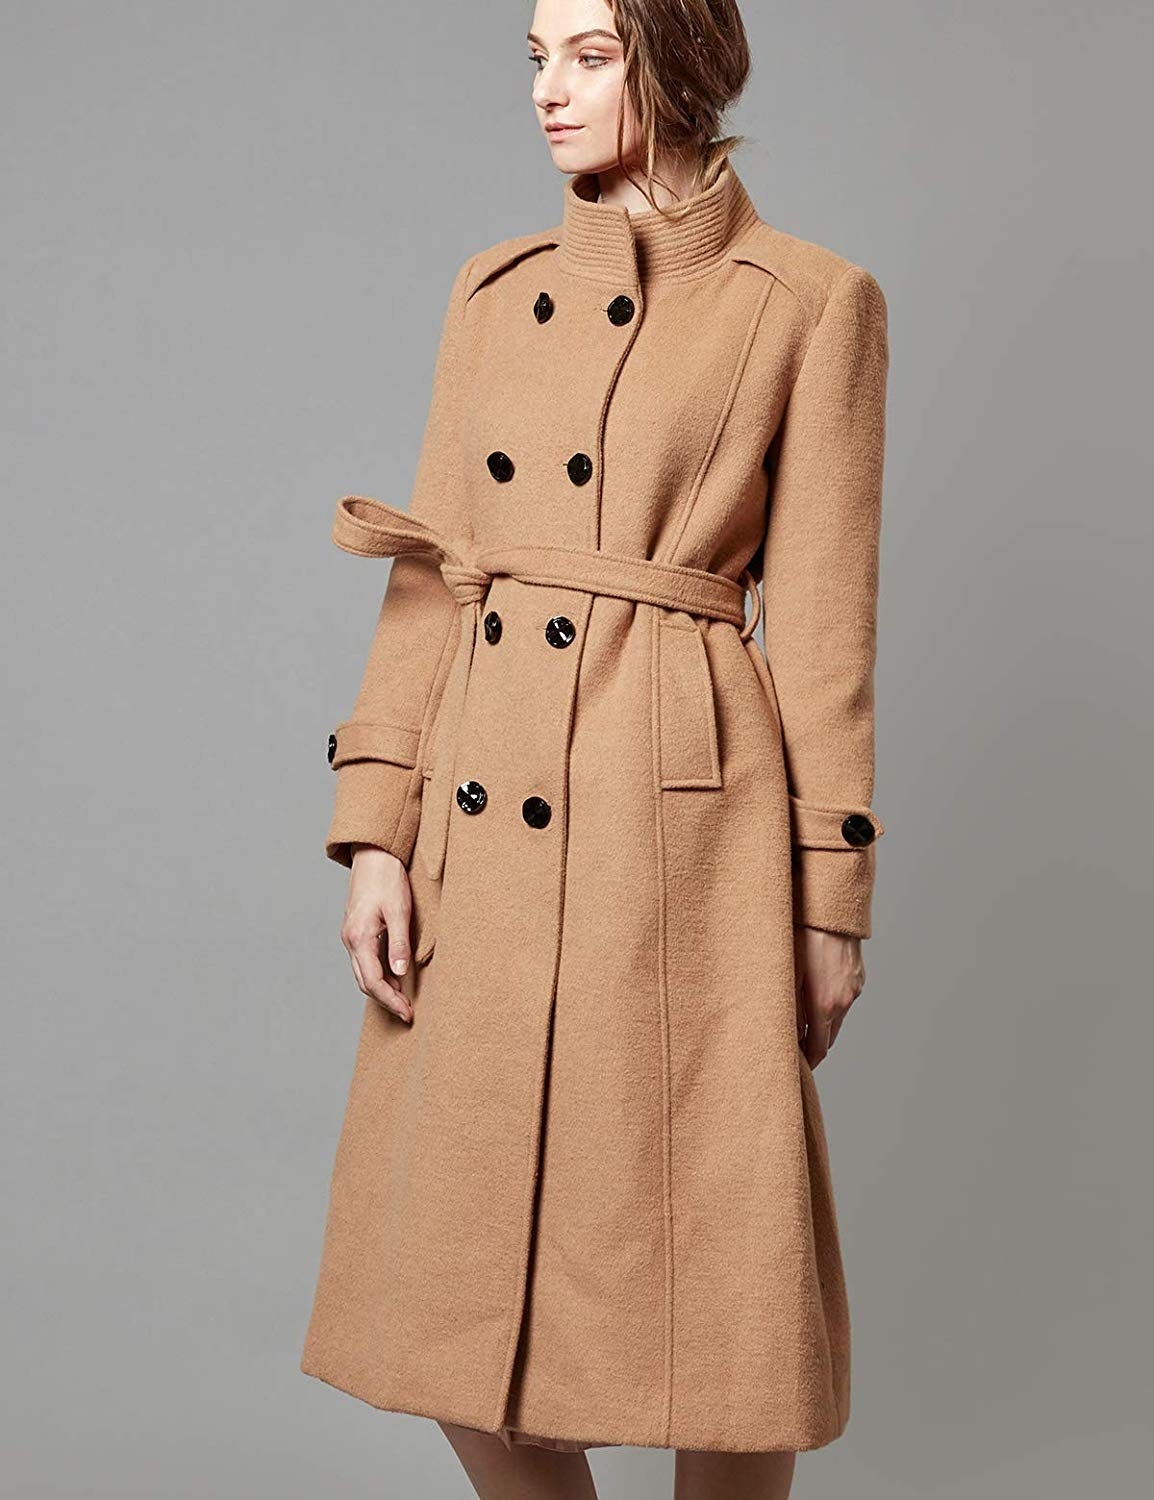 Model wearing the below knee-length coat in tan with two rows of black buttons down the center